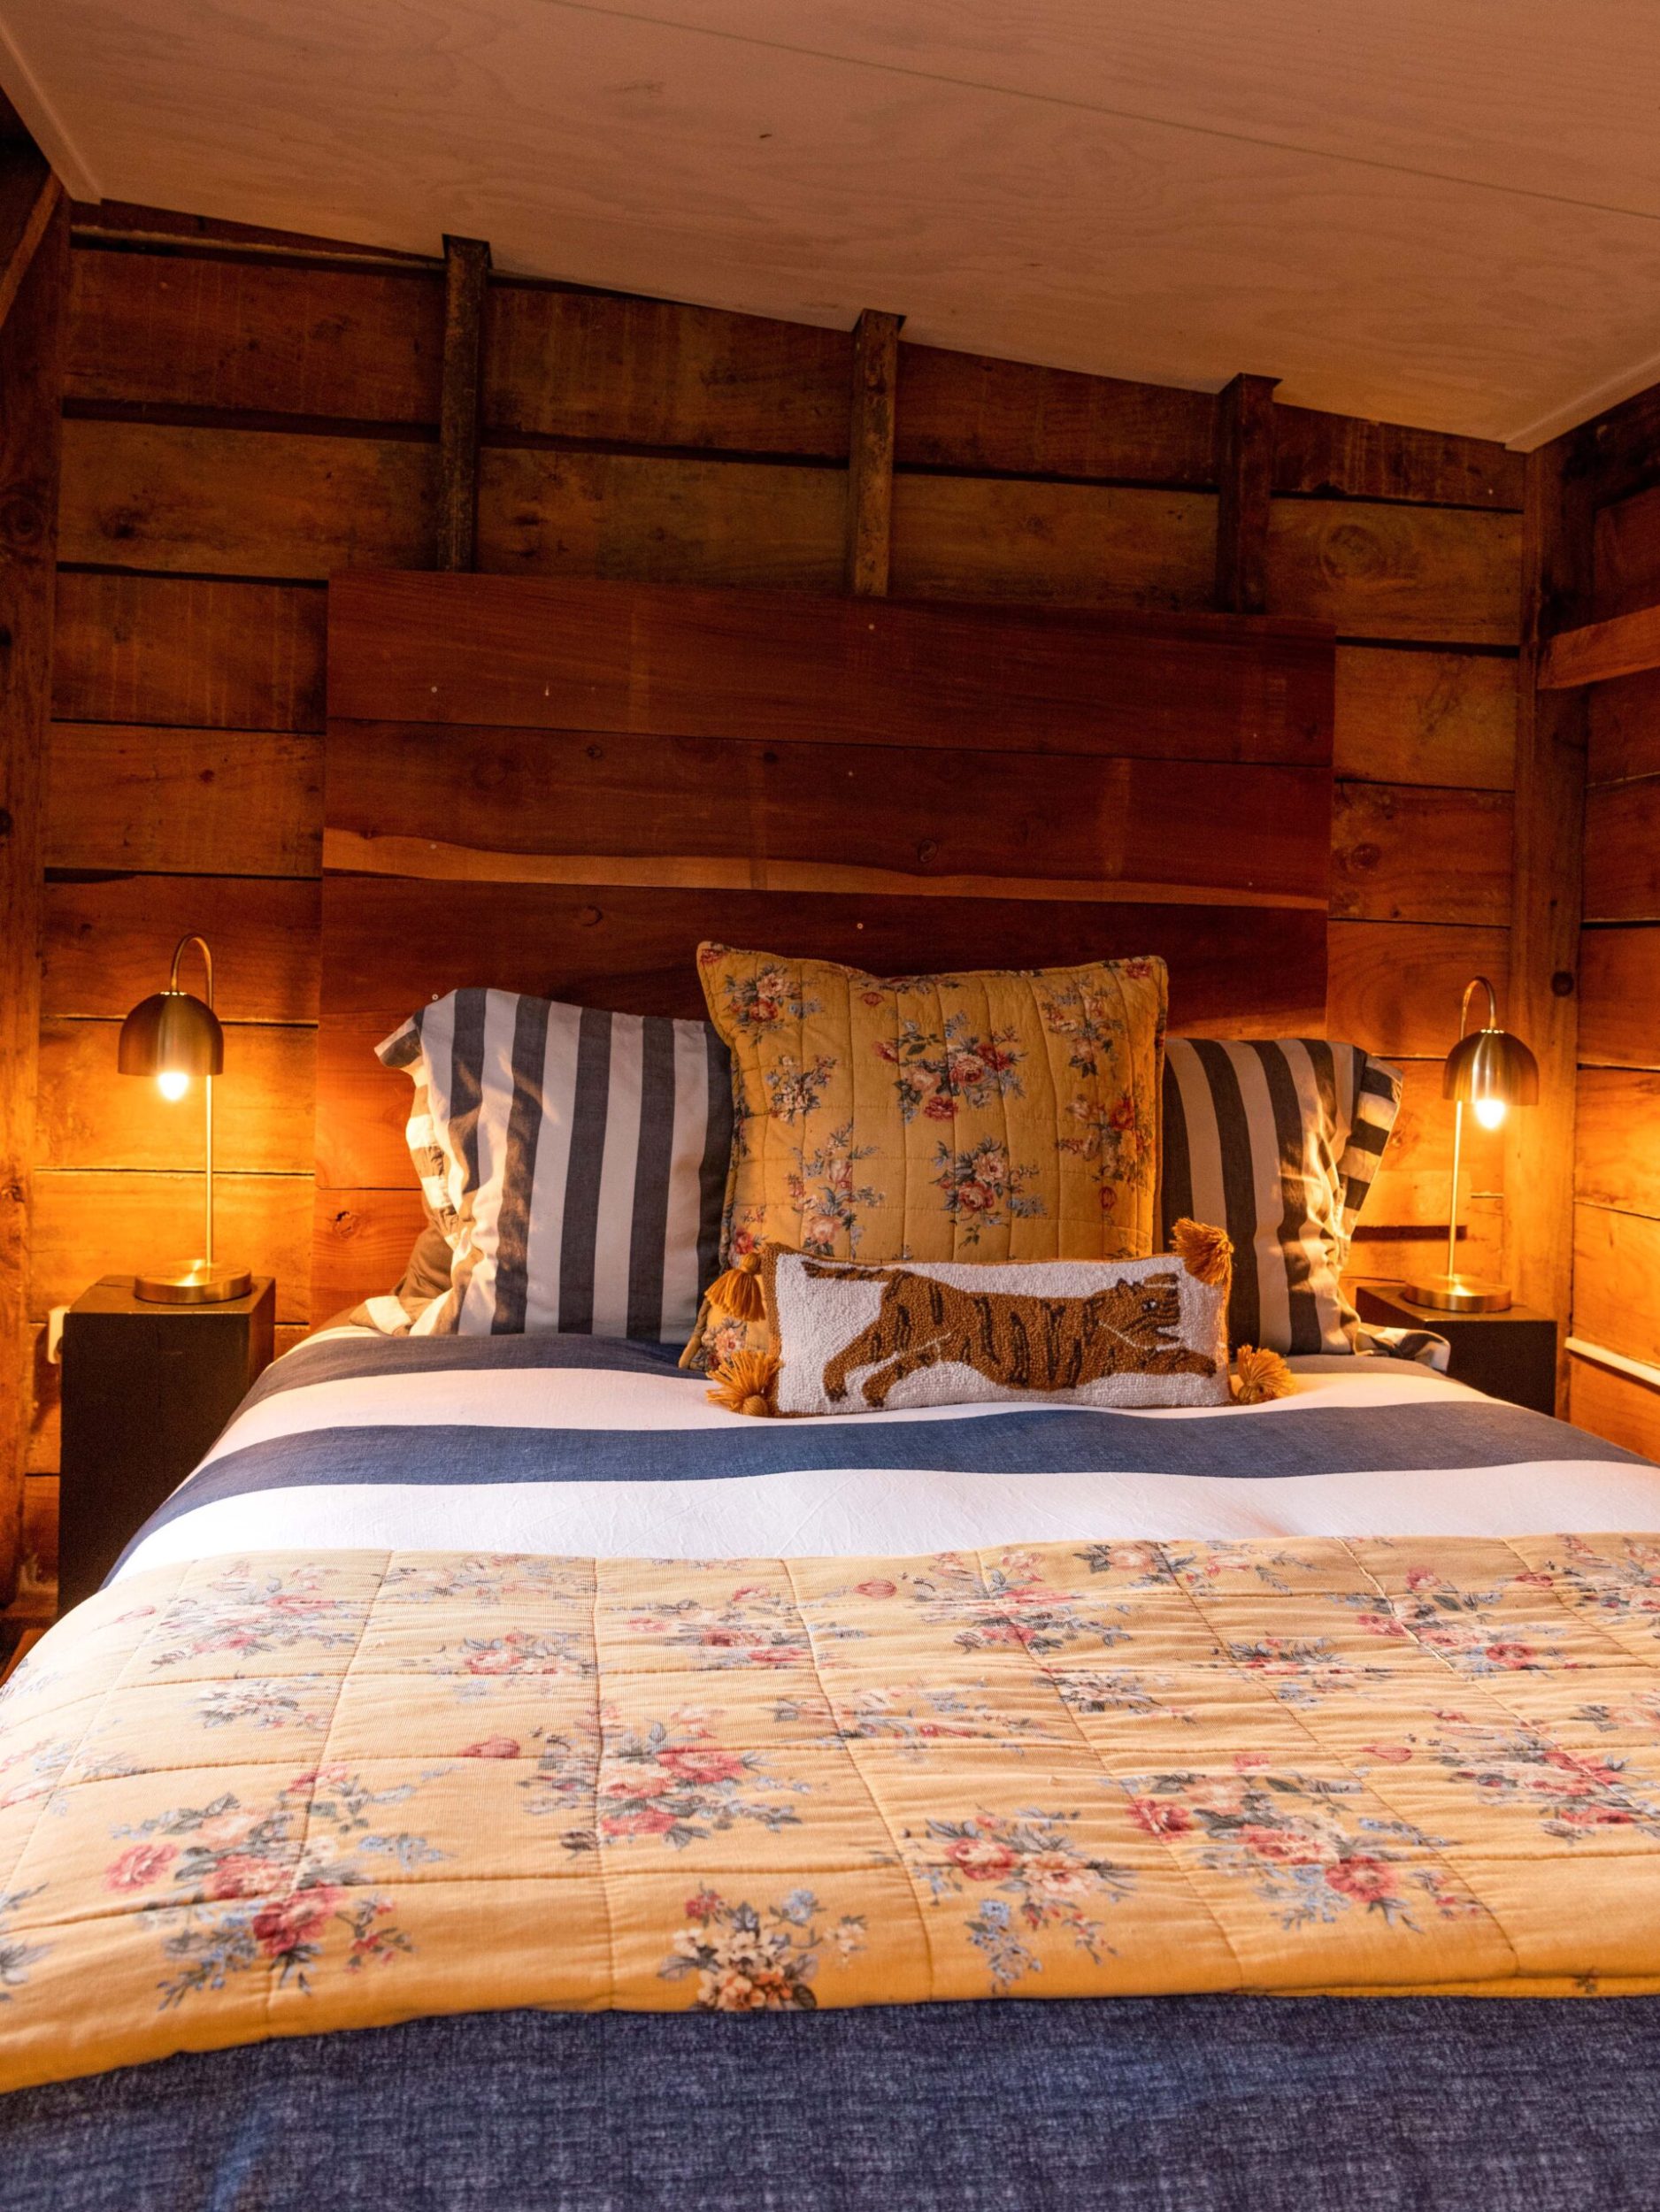 A wood-panelled bedroom with a floral duvet, two lamps on either side of the bed and a cushion with a tiger on it